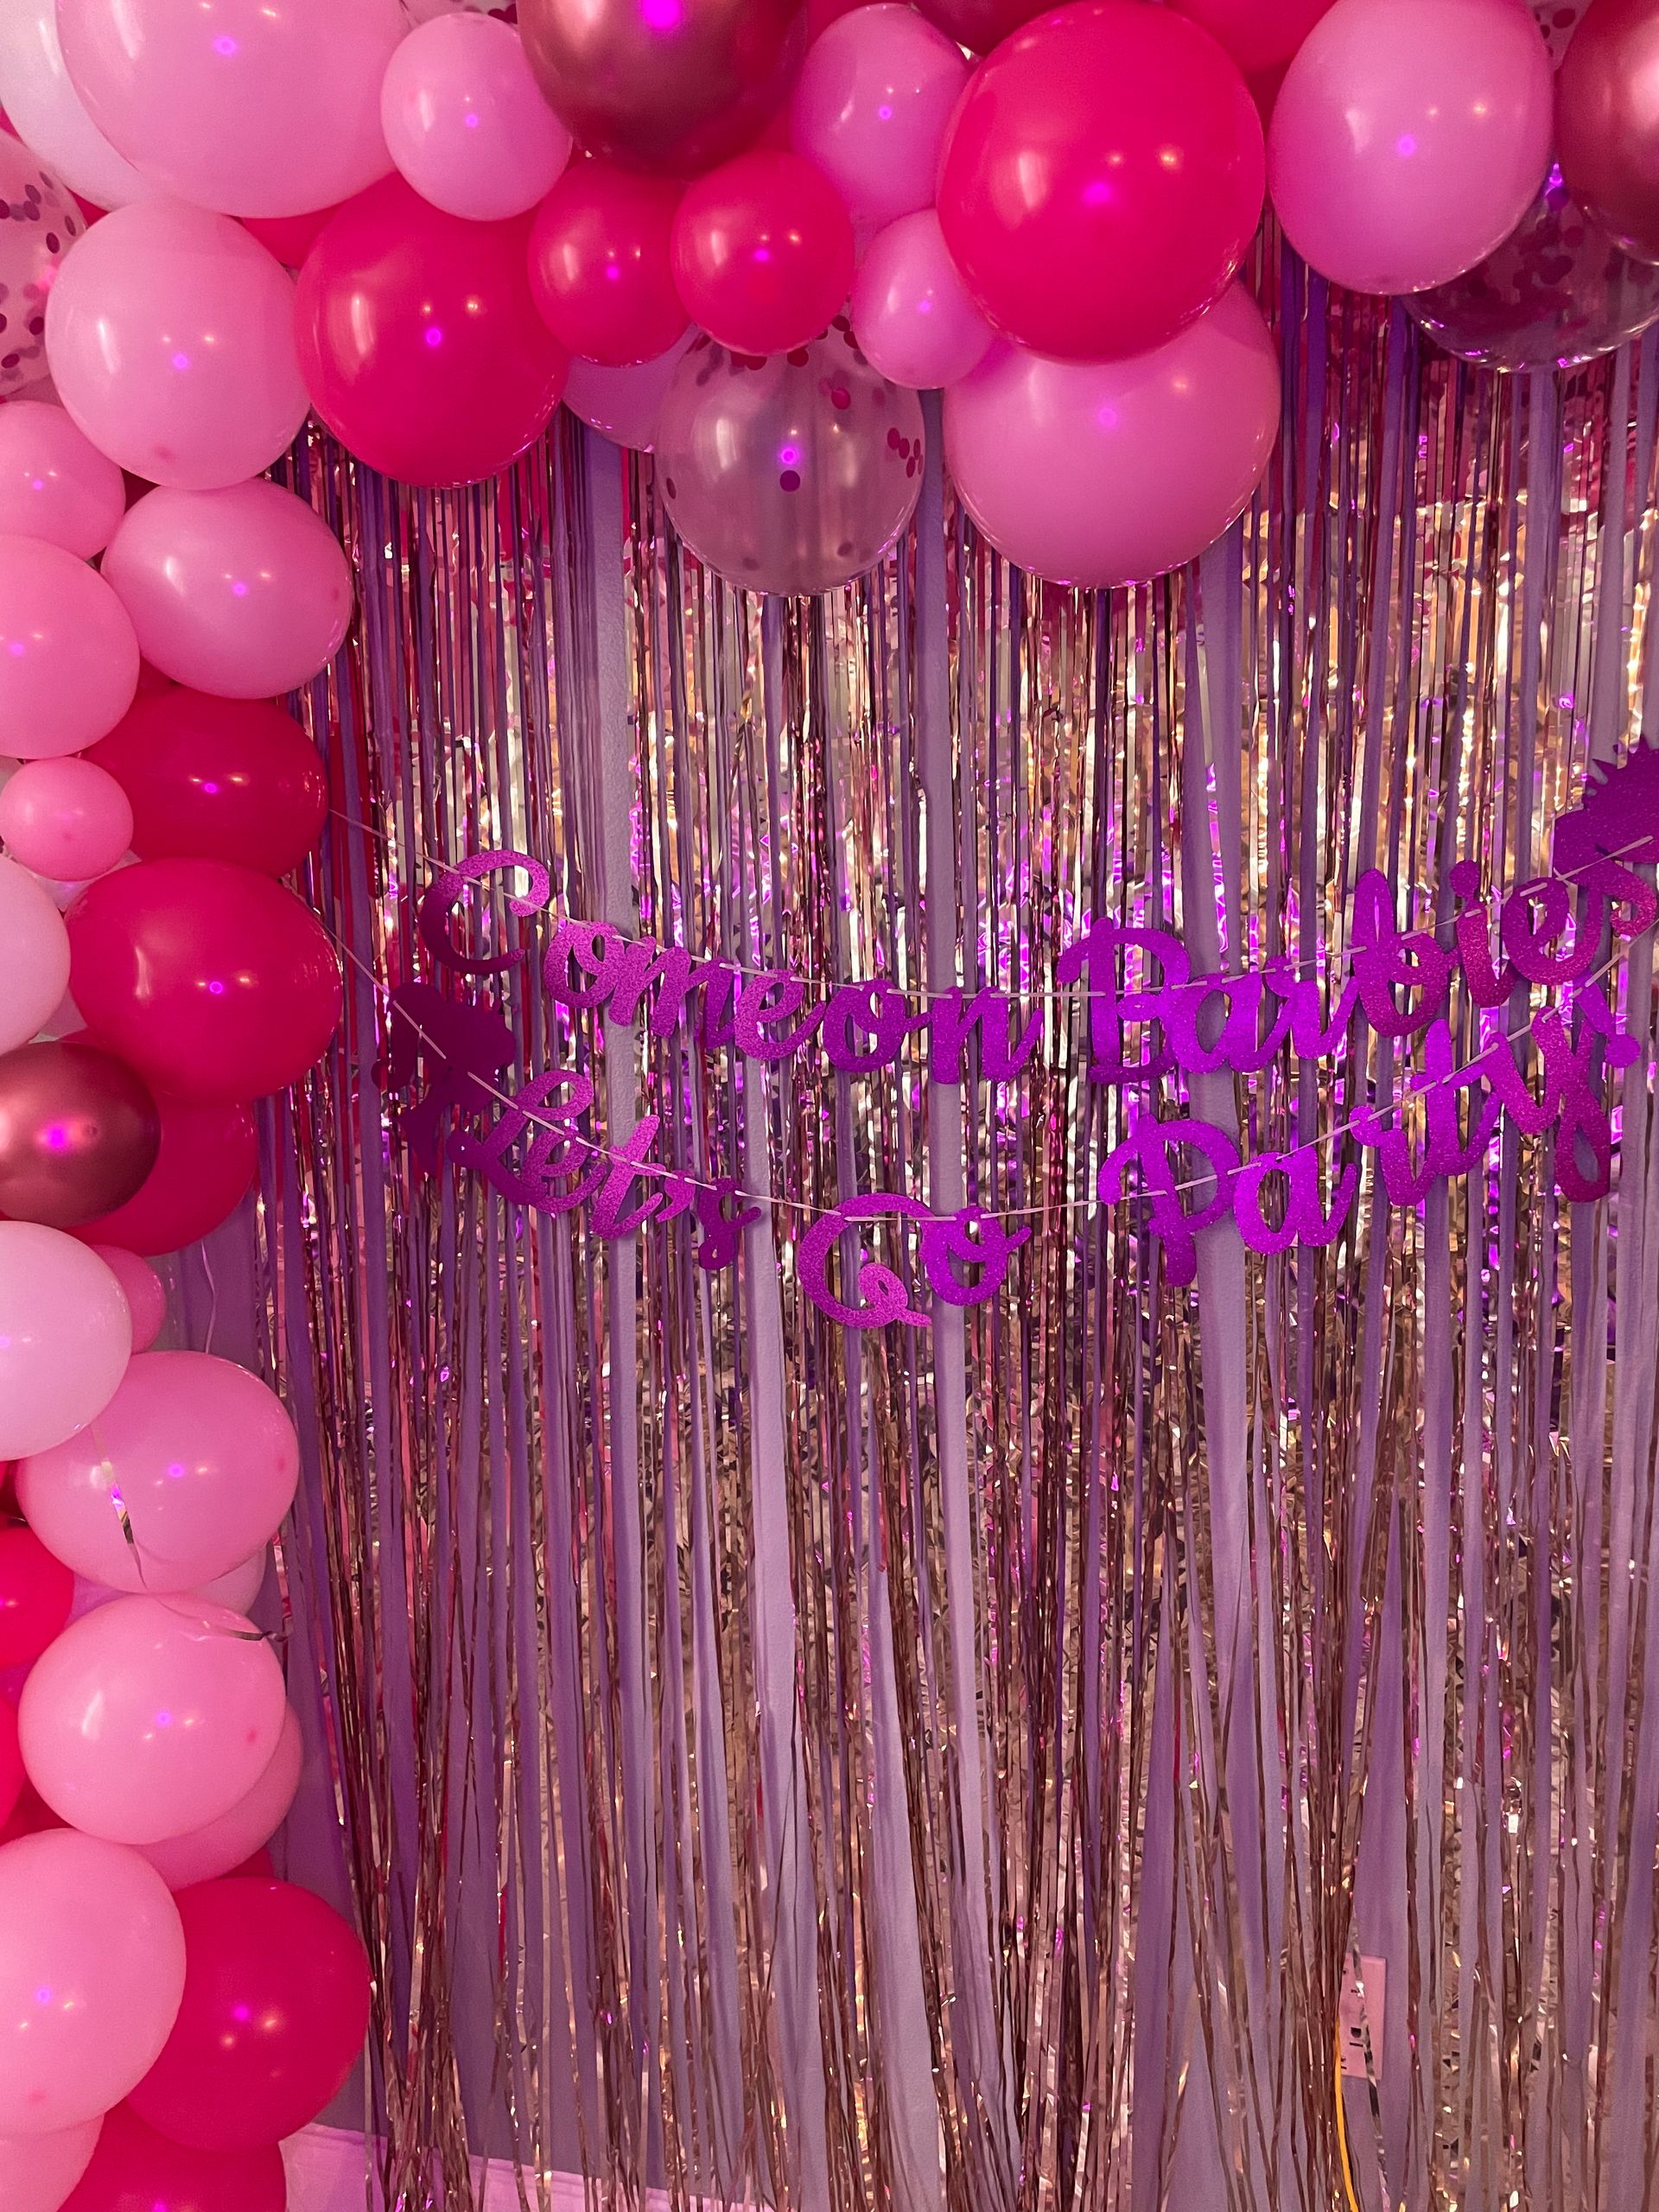 Party Decoration Packages with Delivery and Setup Included: Basic